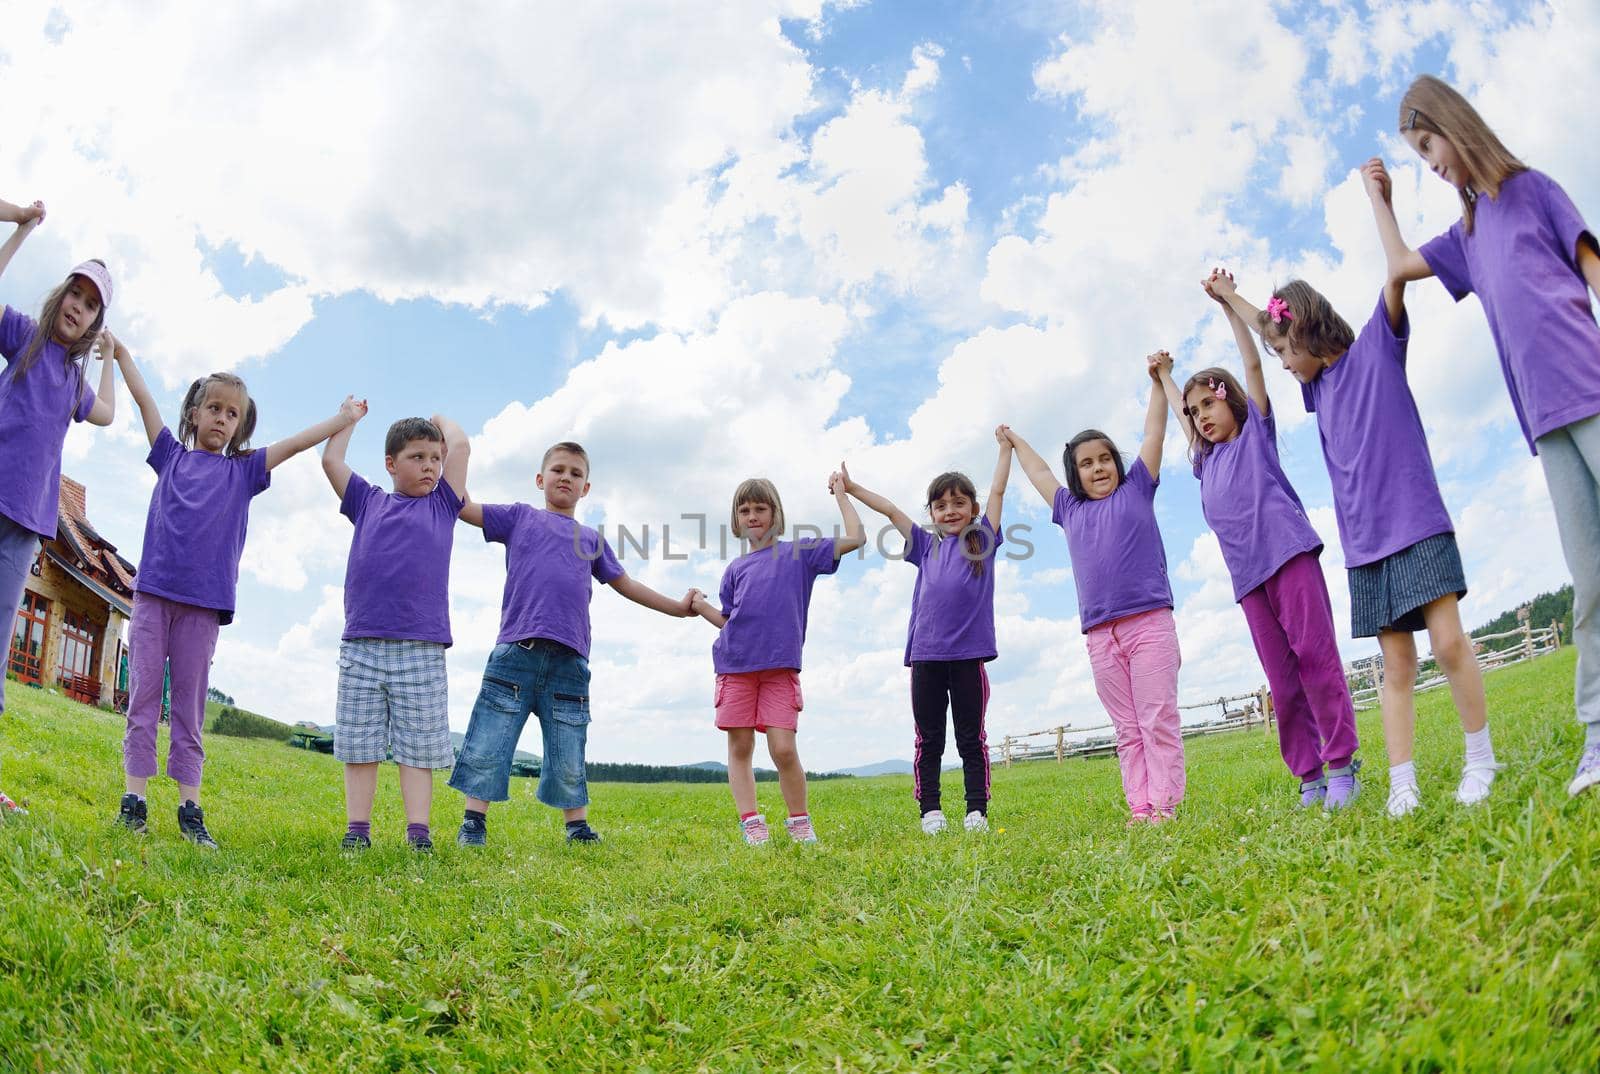 happy kids group have fun in nature outdoors park